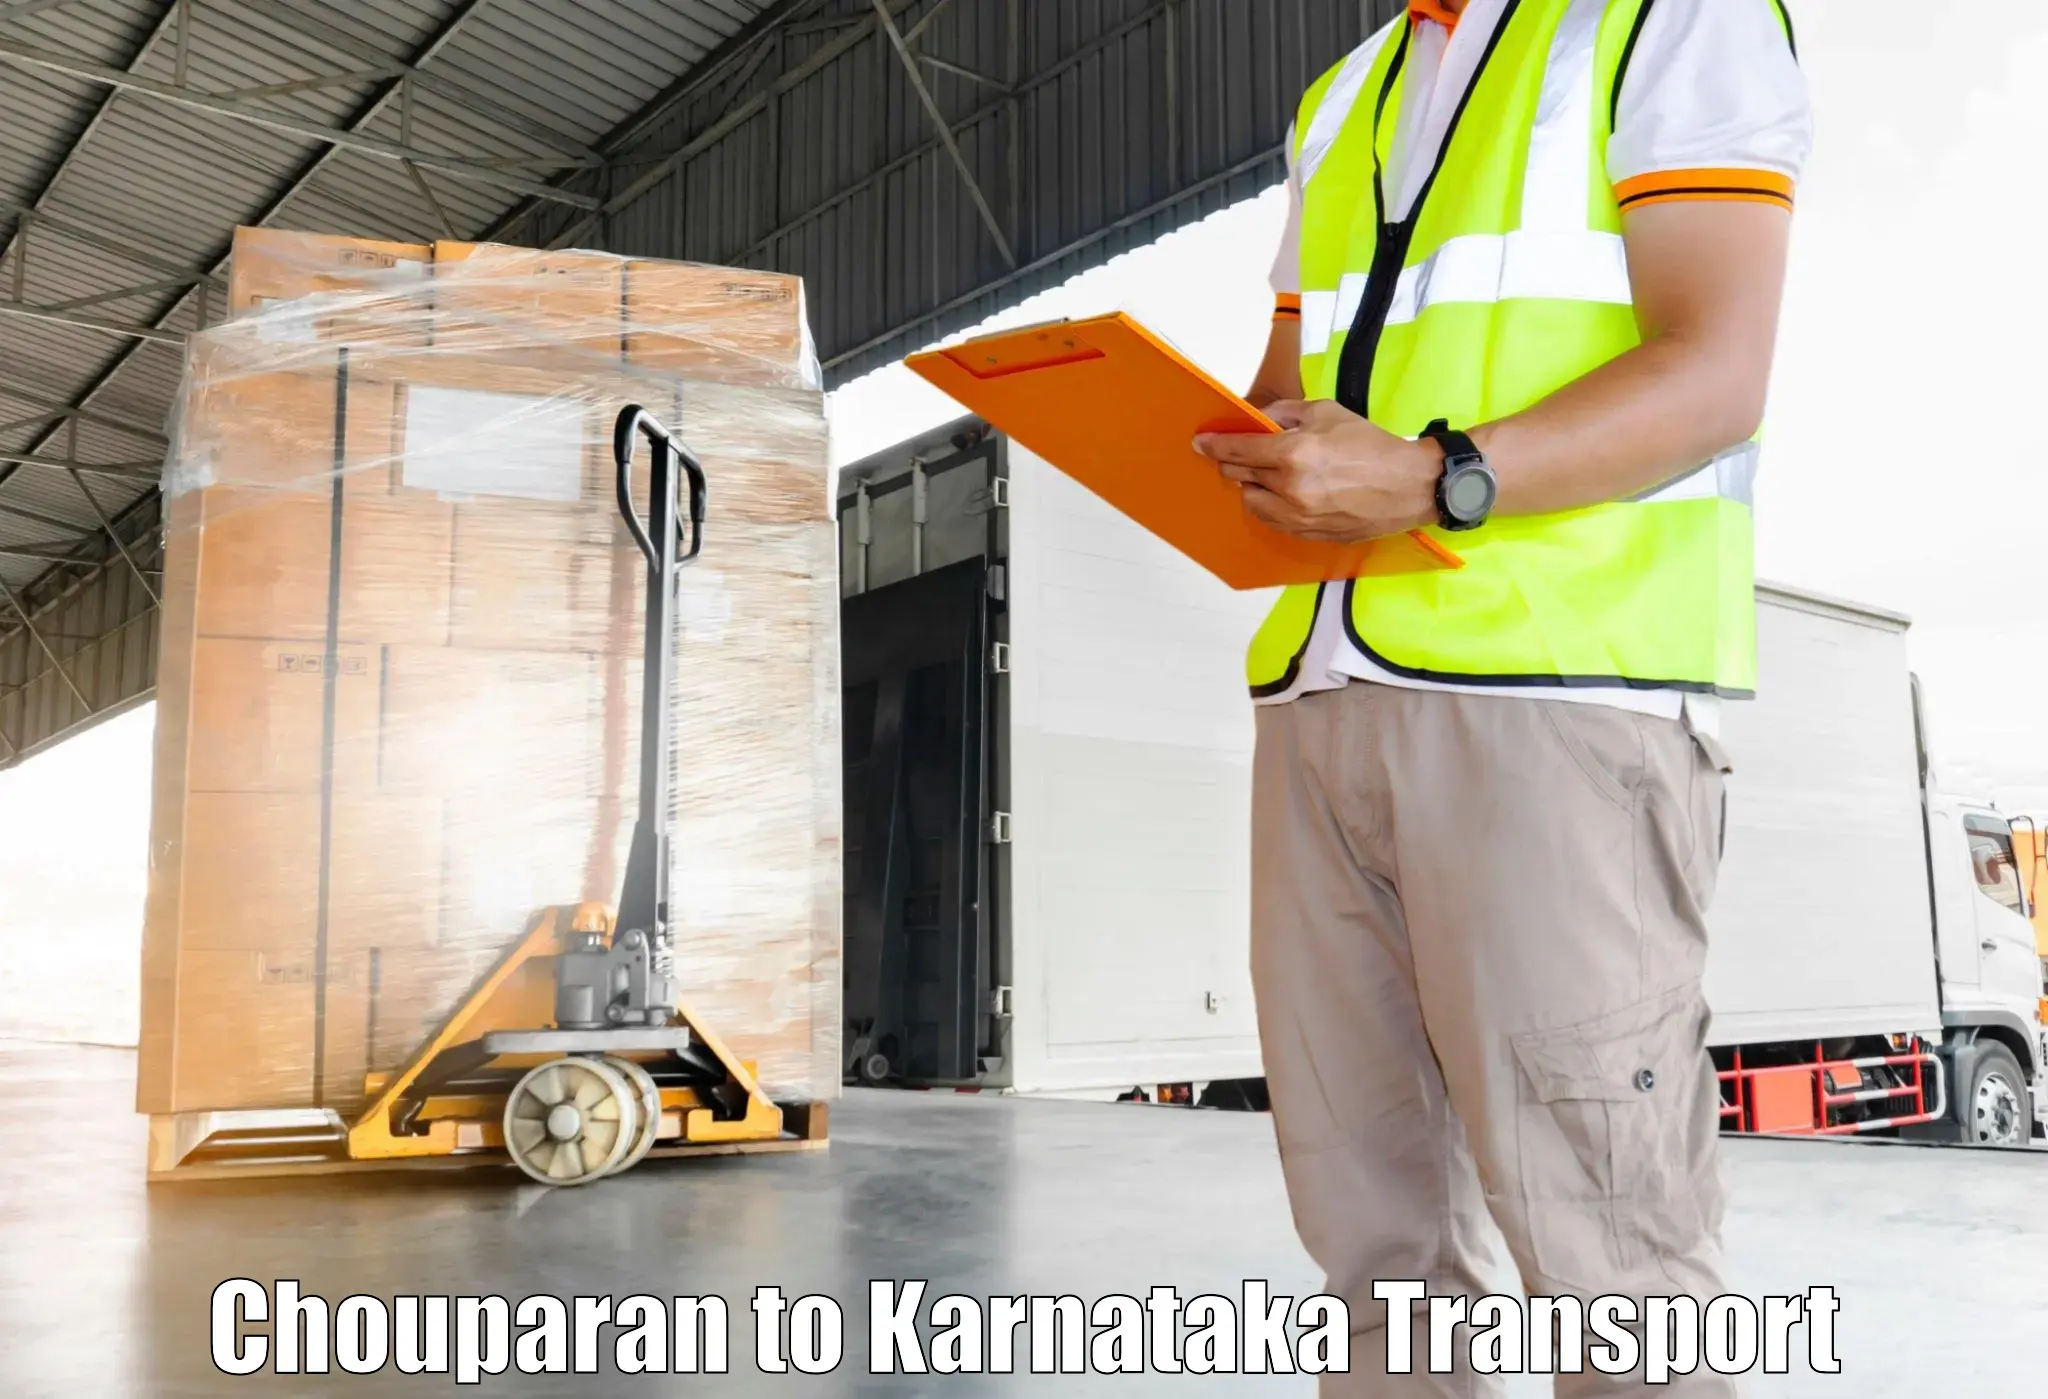 Container transportation services Chouparan to Manipal